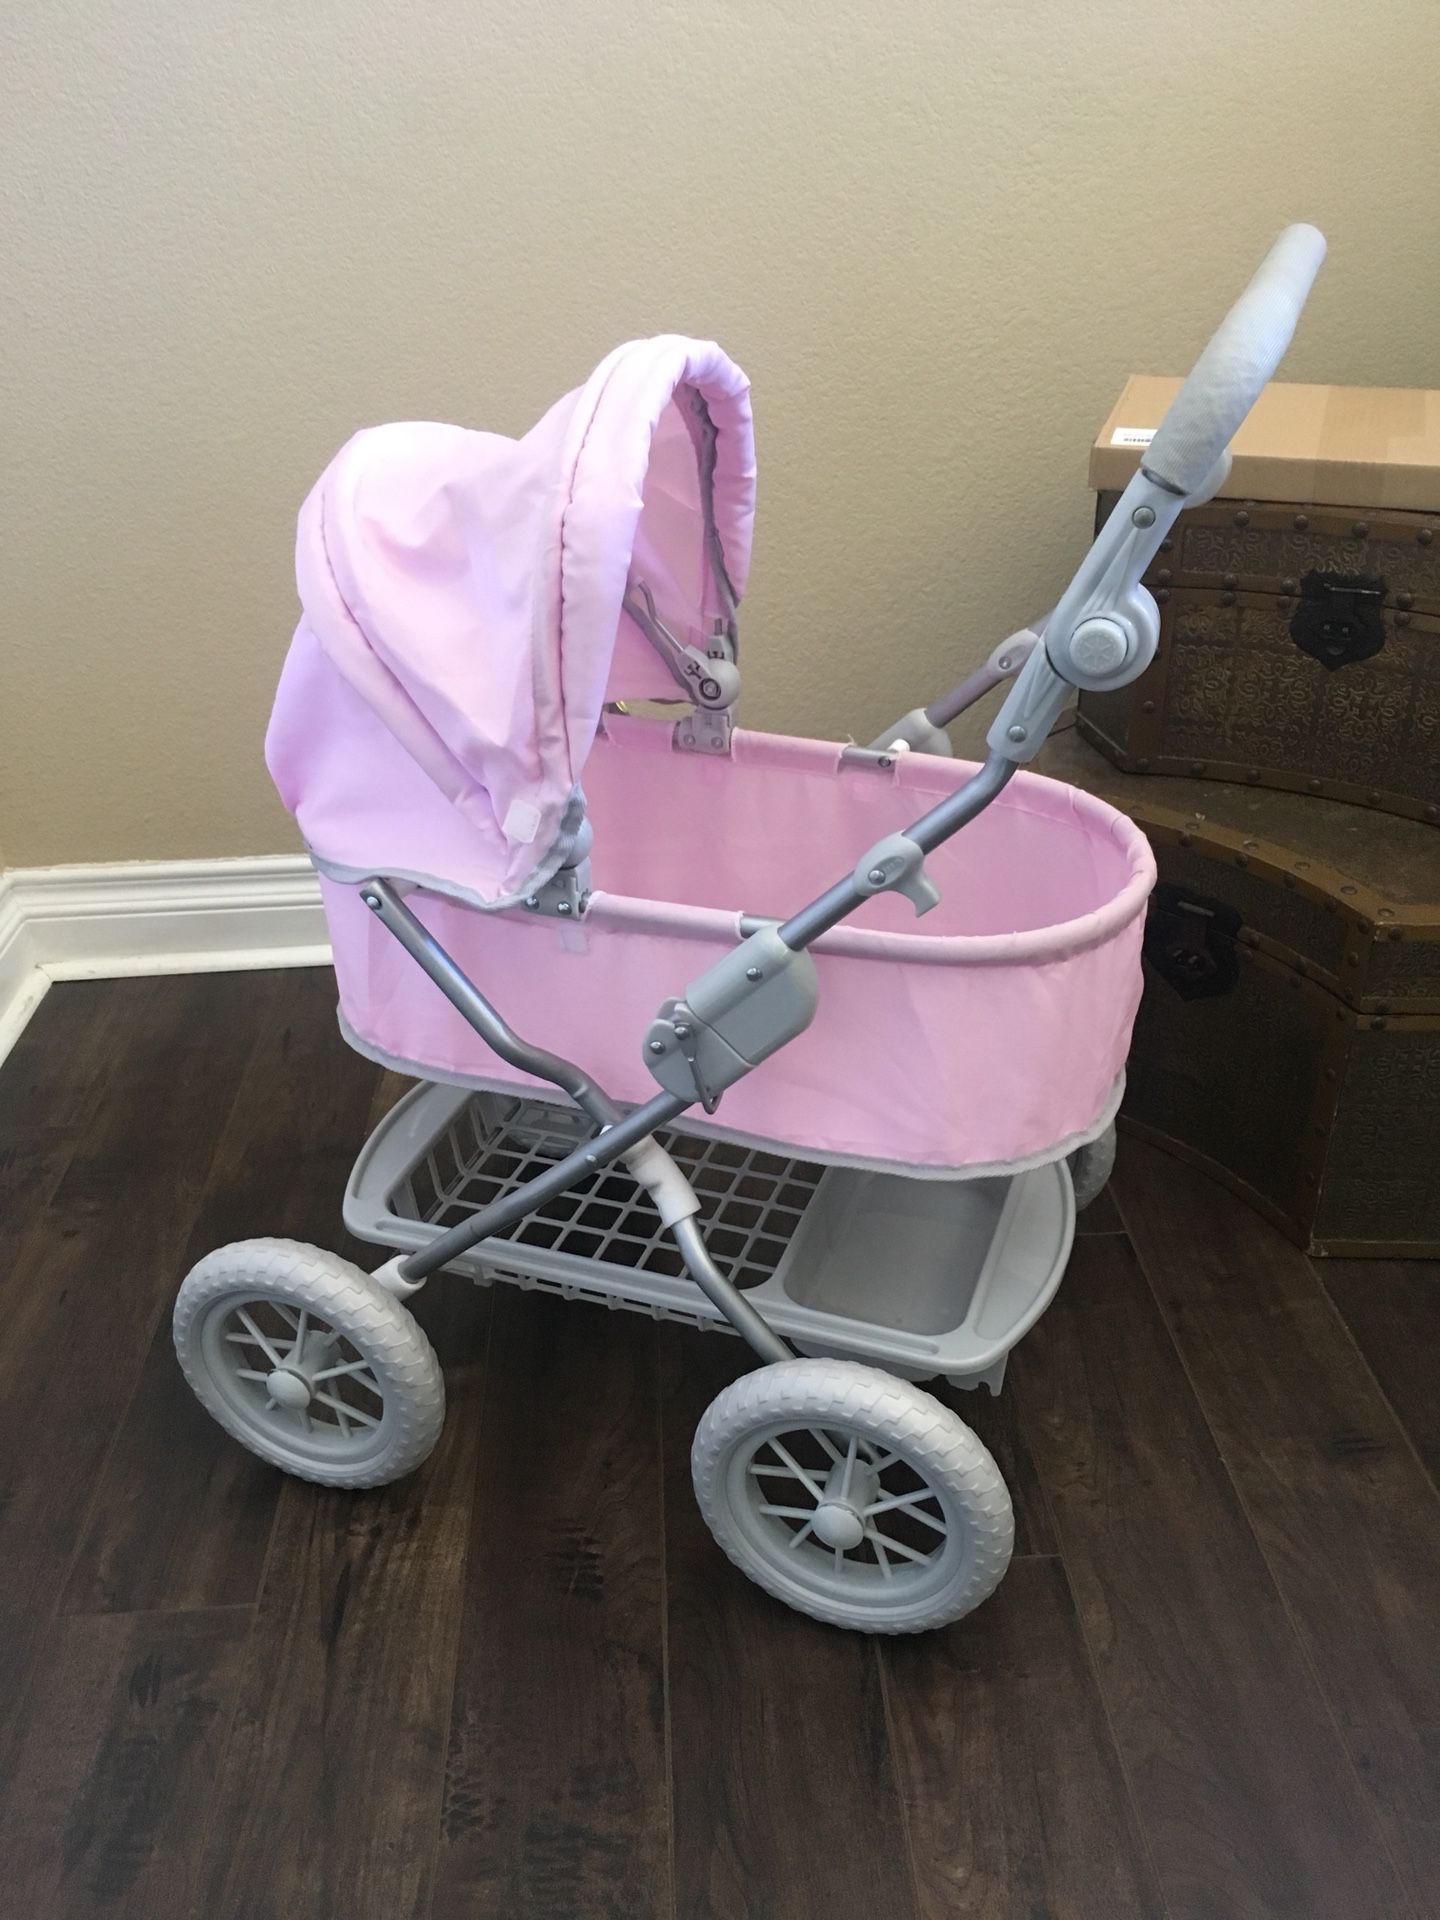 Pottery Barn Kids Toy Stroller For Sale In San Diego